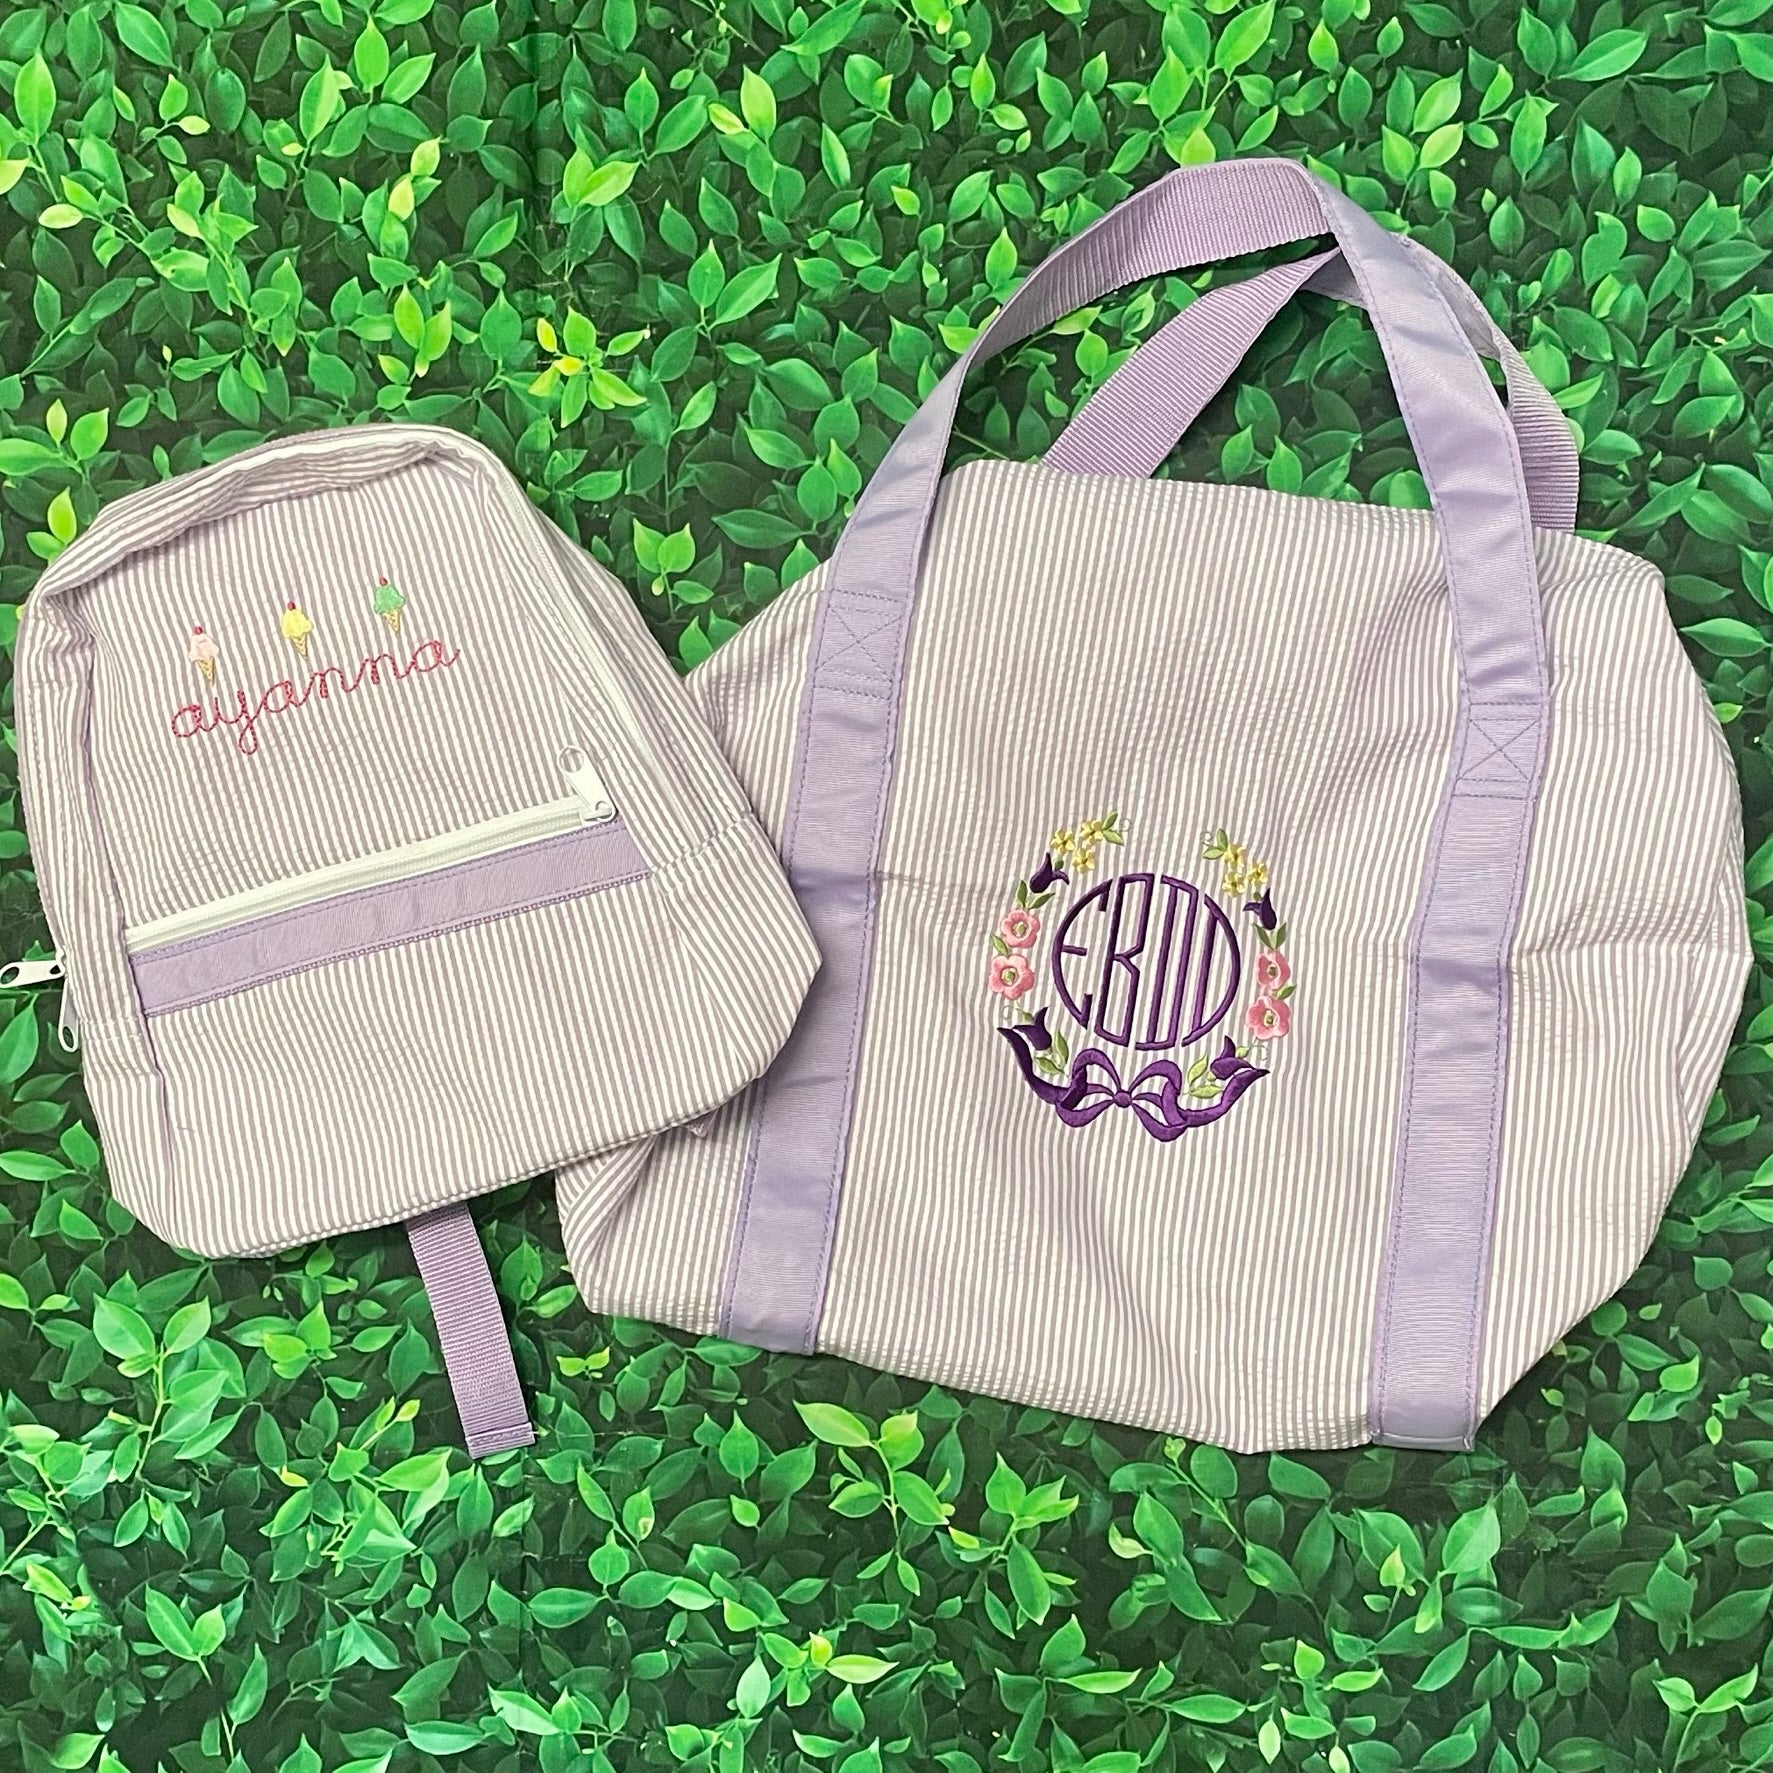 Small Toddler Backpack by Mint